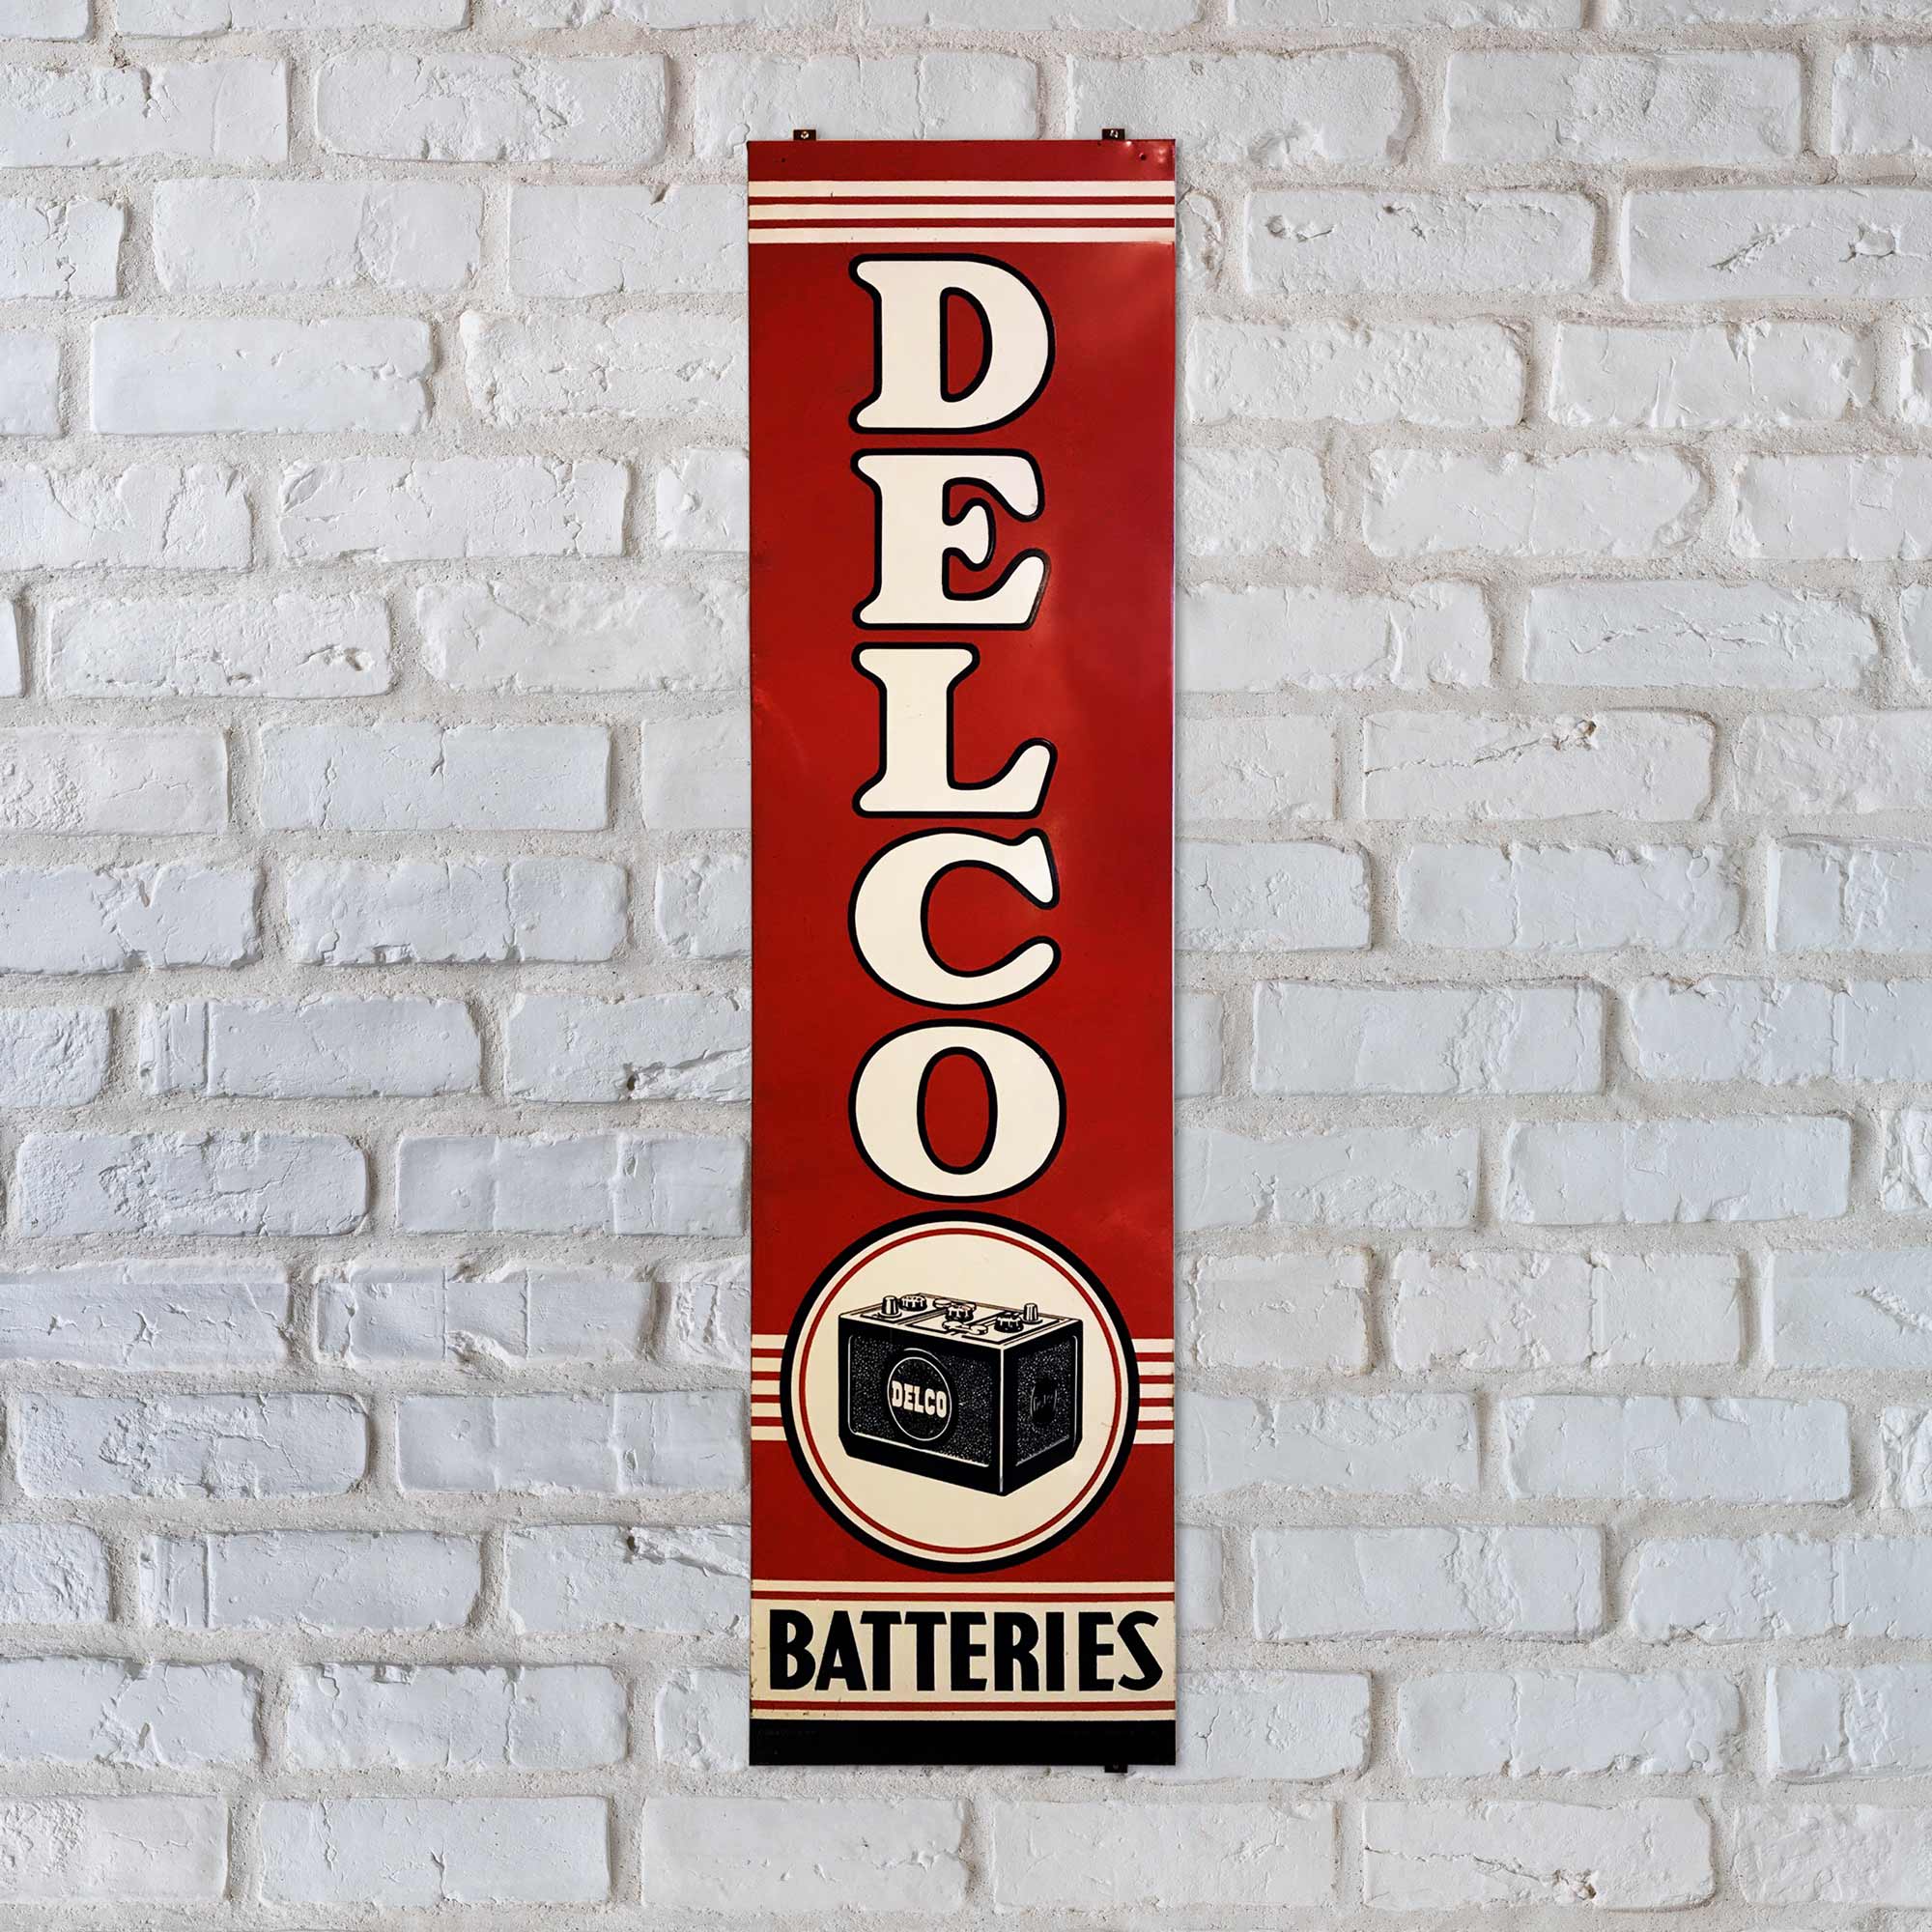 Delco Batteries: Powering A Legacy Through The Signs Of Time